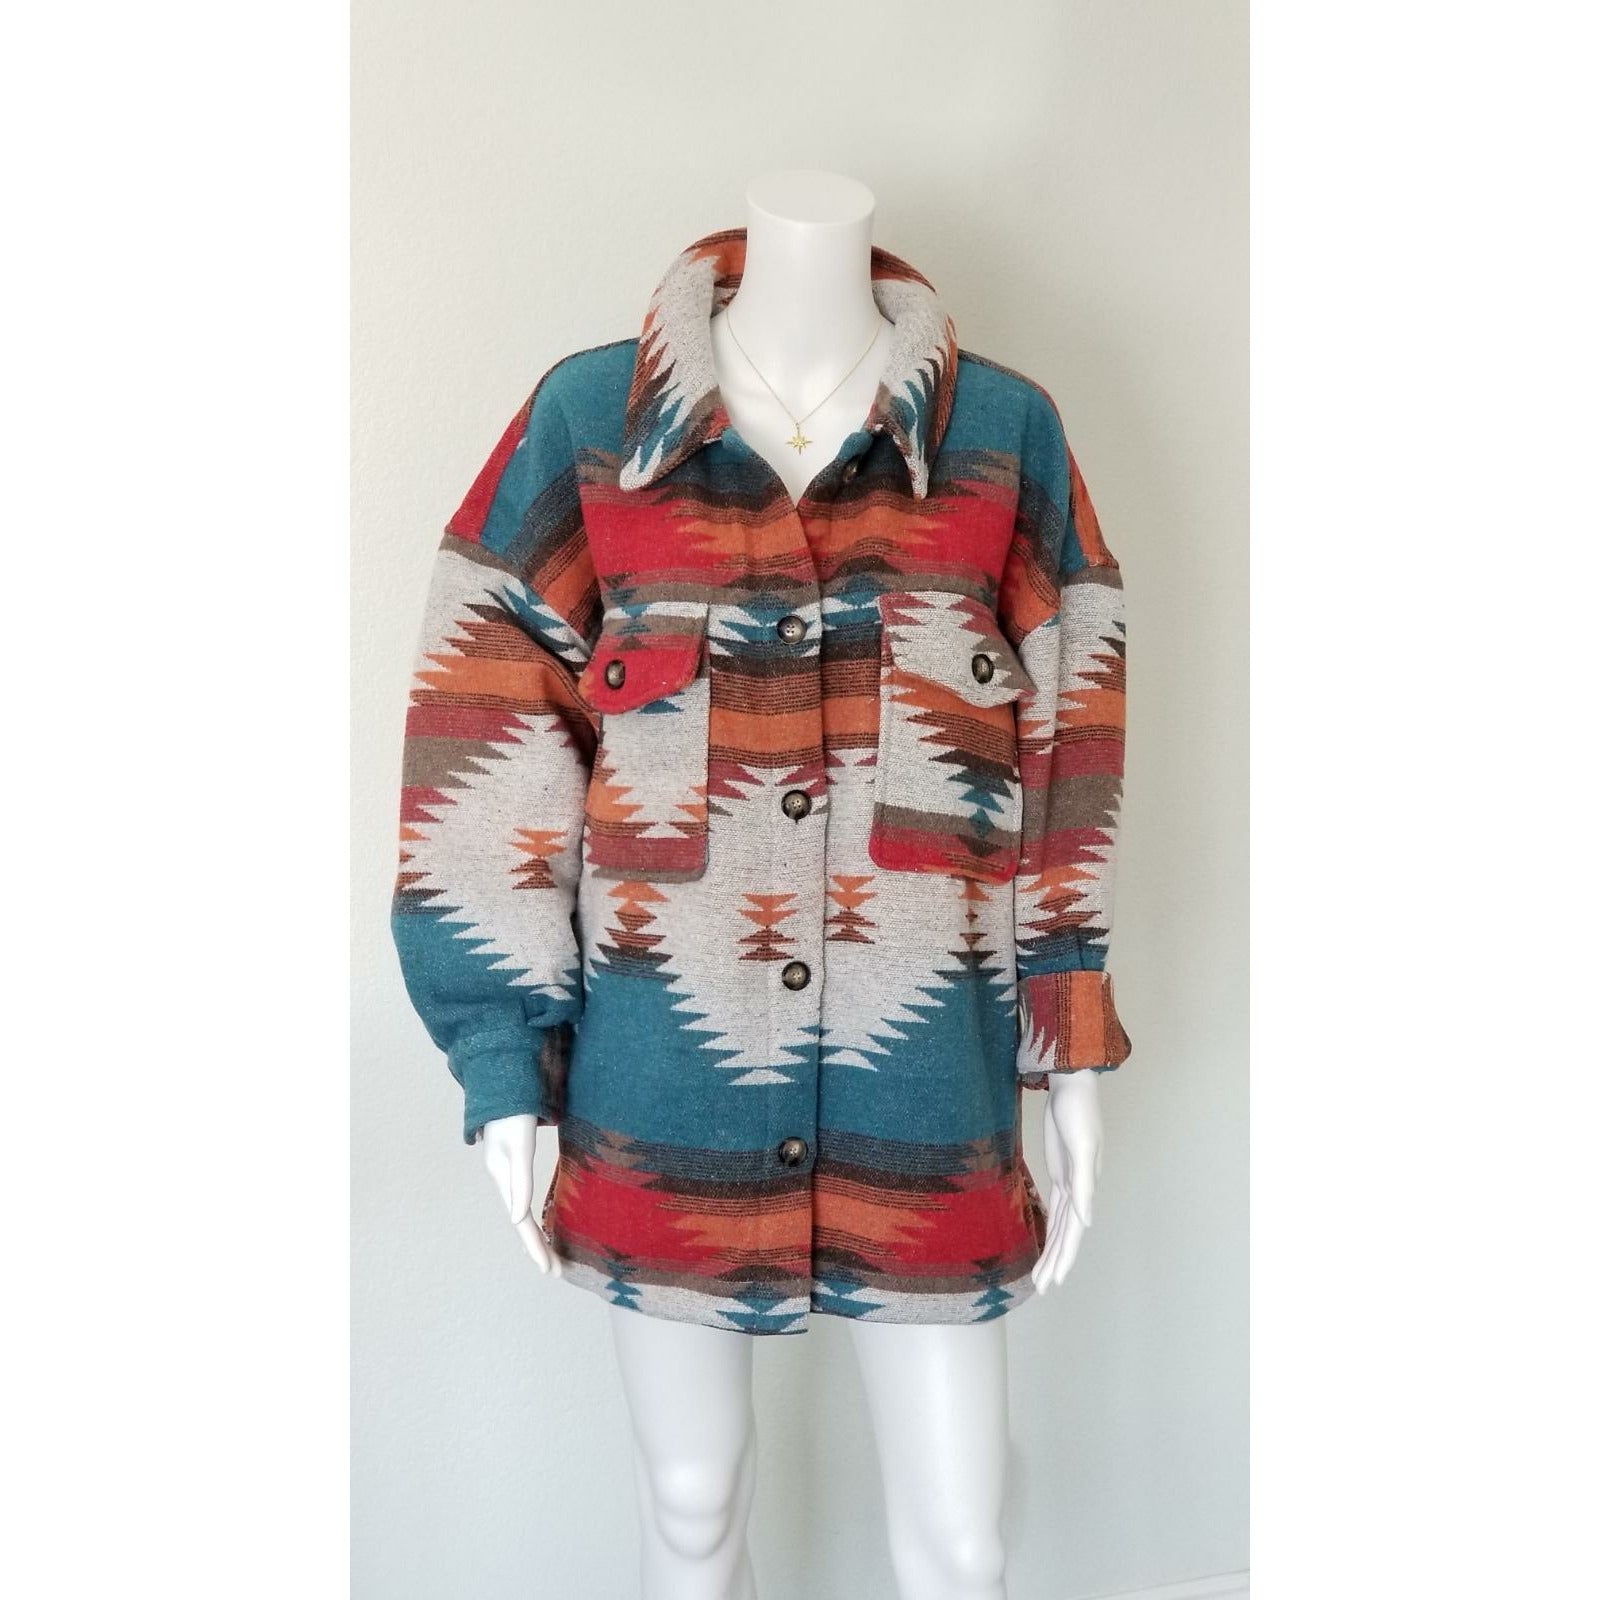 Oversized Aztec Inspired Geometric Print Jacket, red and teal with natural colors